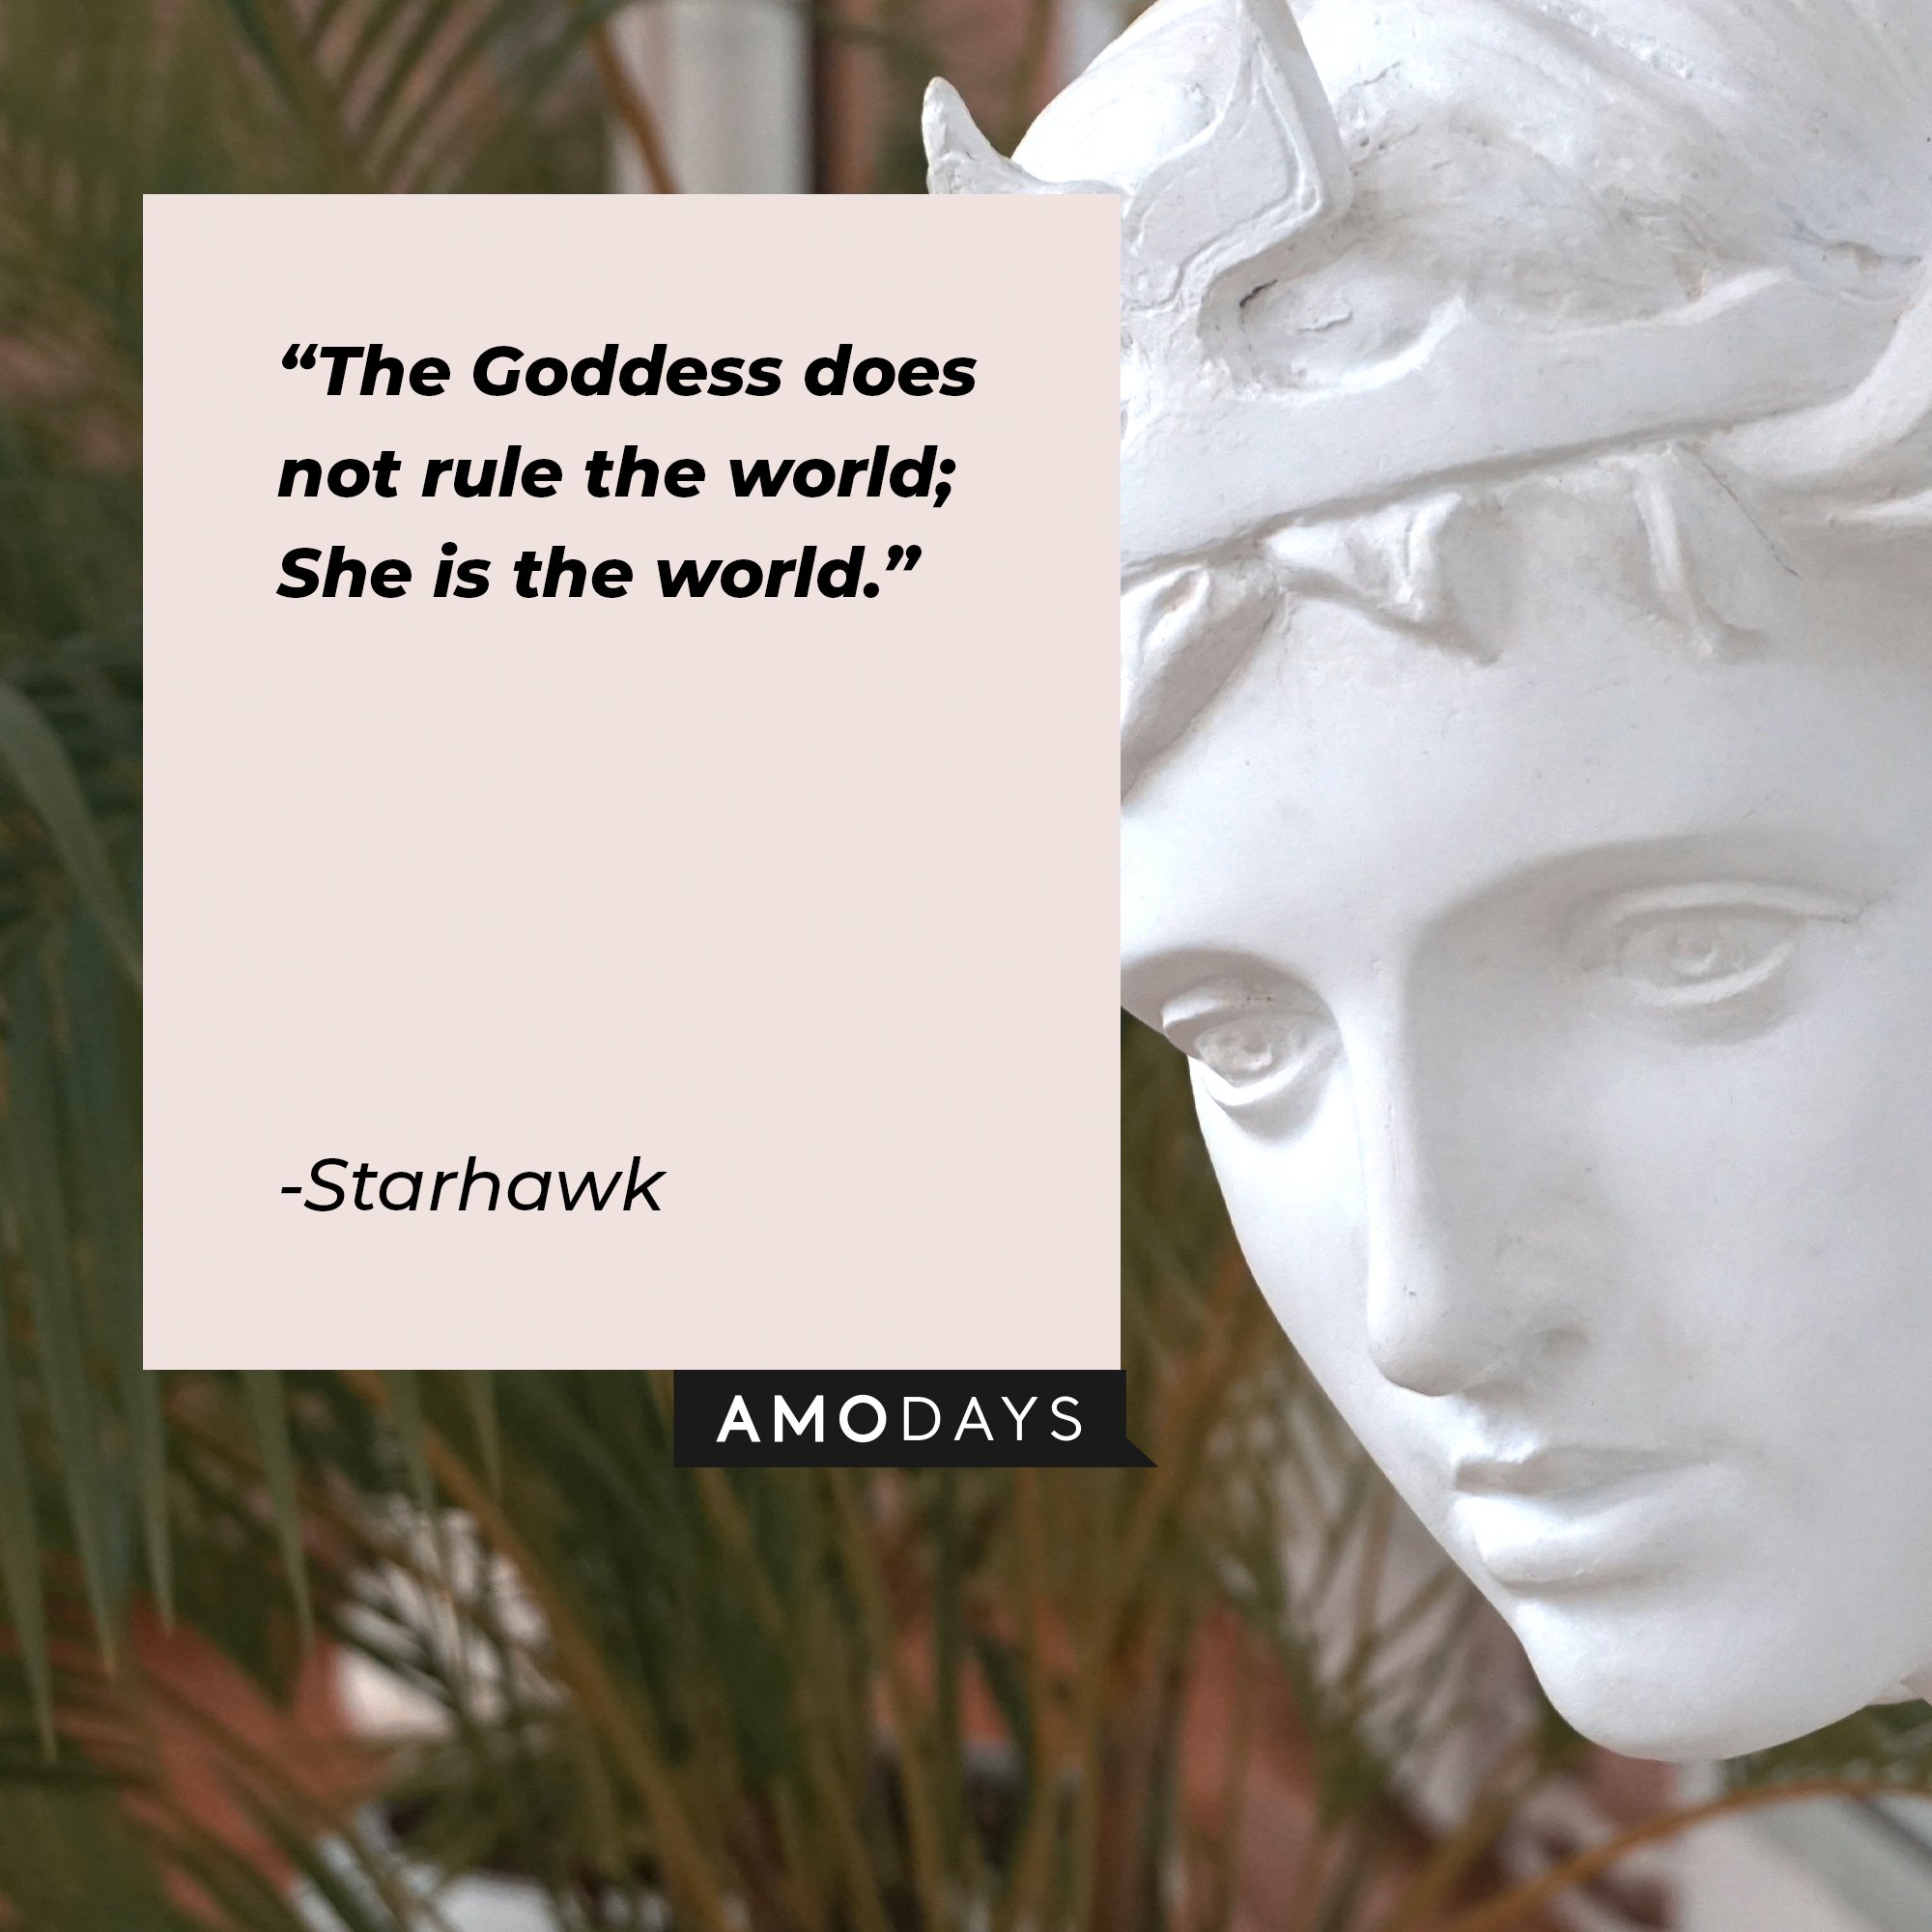  Starhawk’s quote: "The Goddess does not rule the world; She is the world." | Image: AmoDays 